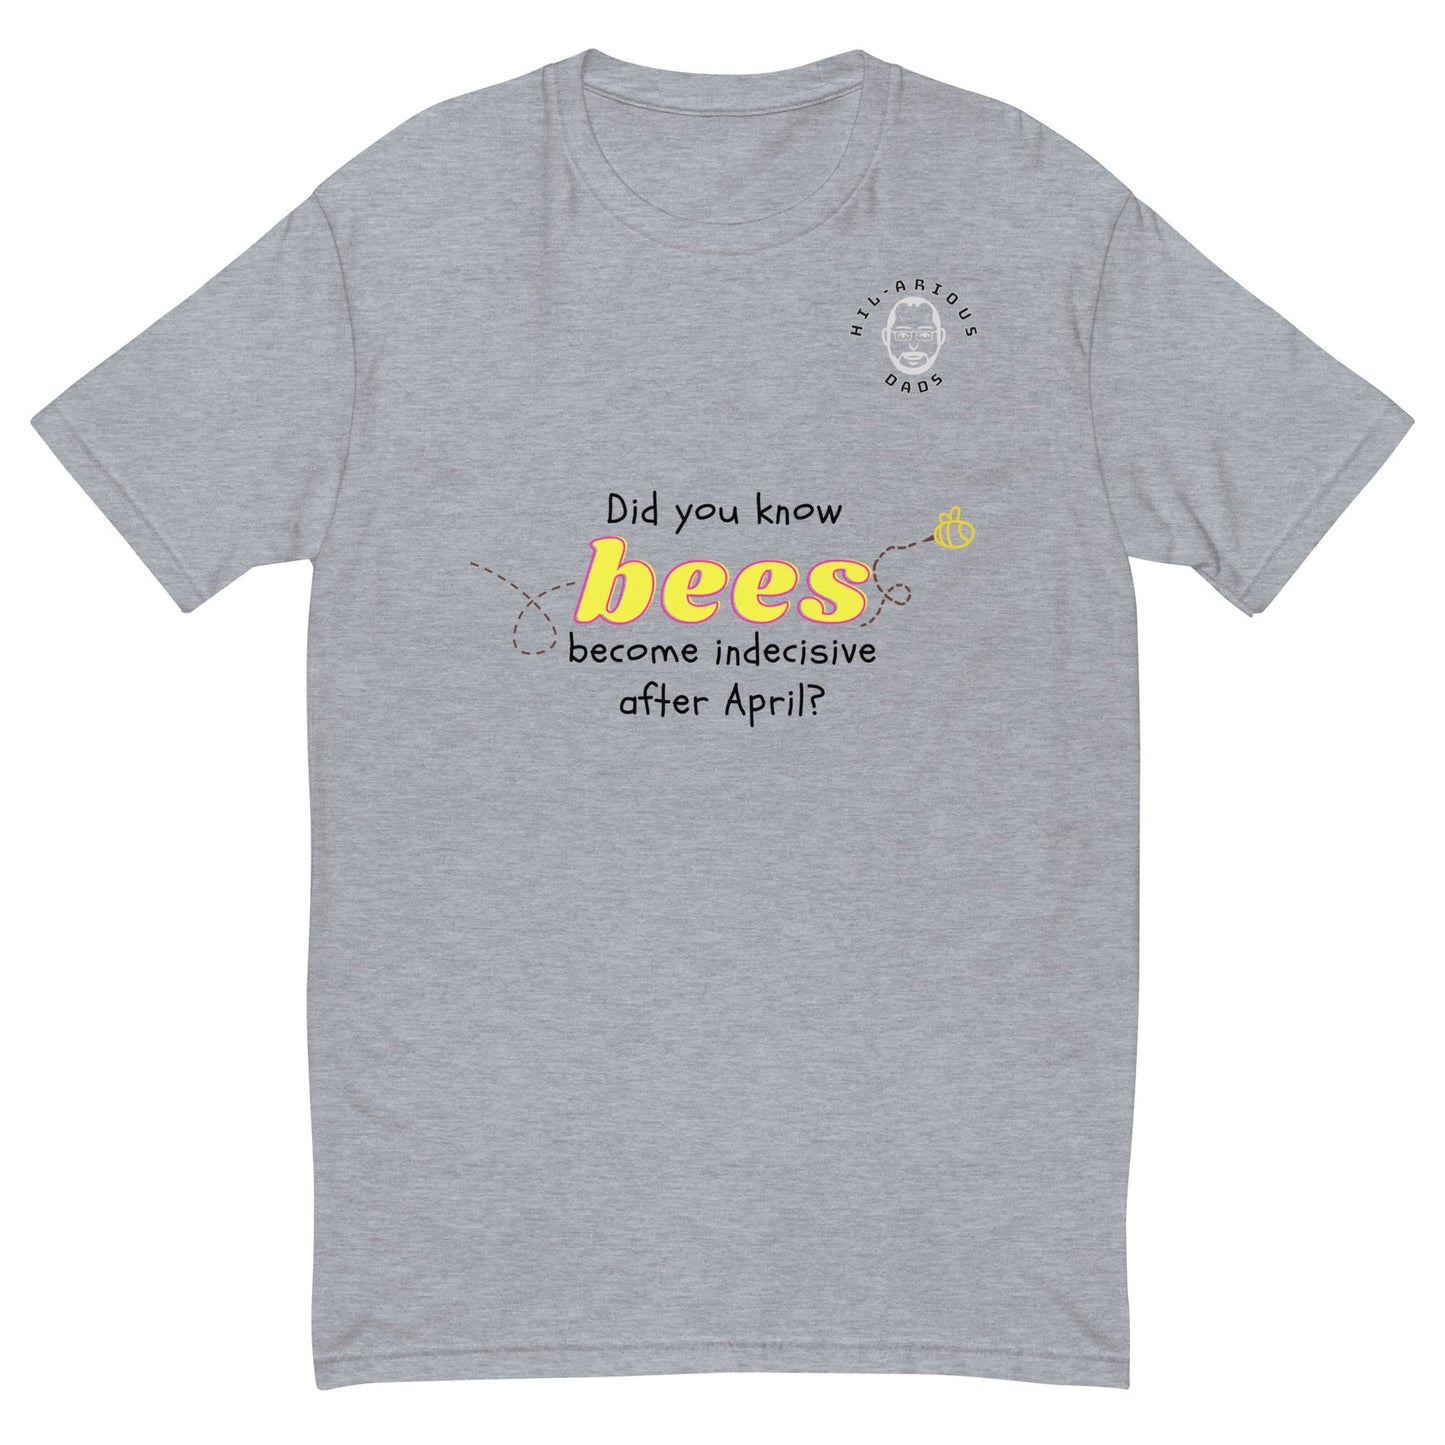 Did you know bees become indecisive after April?-T-shirt - Hil-arious Dads